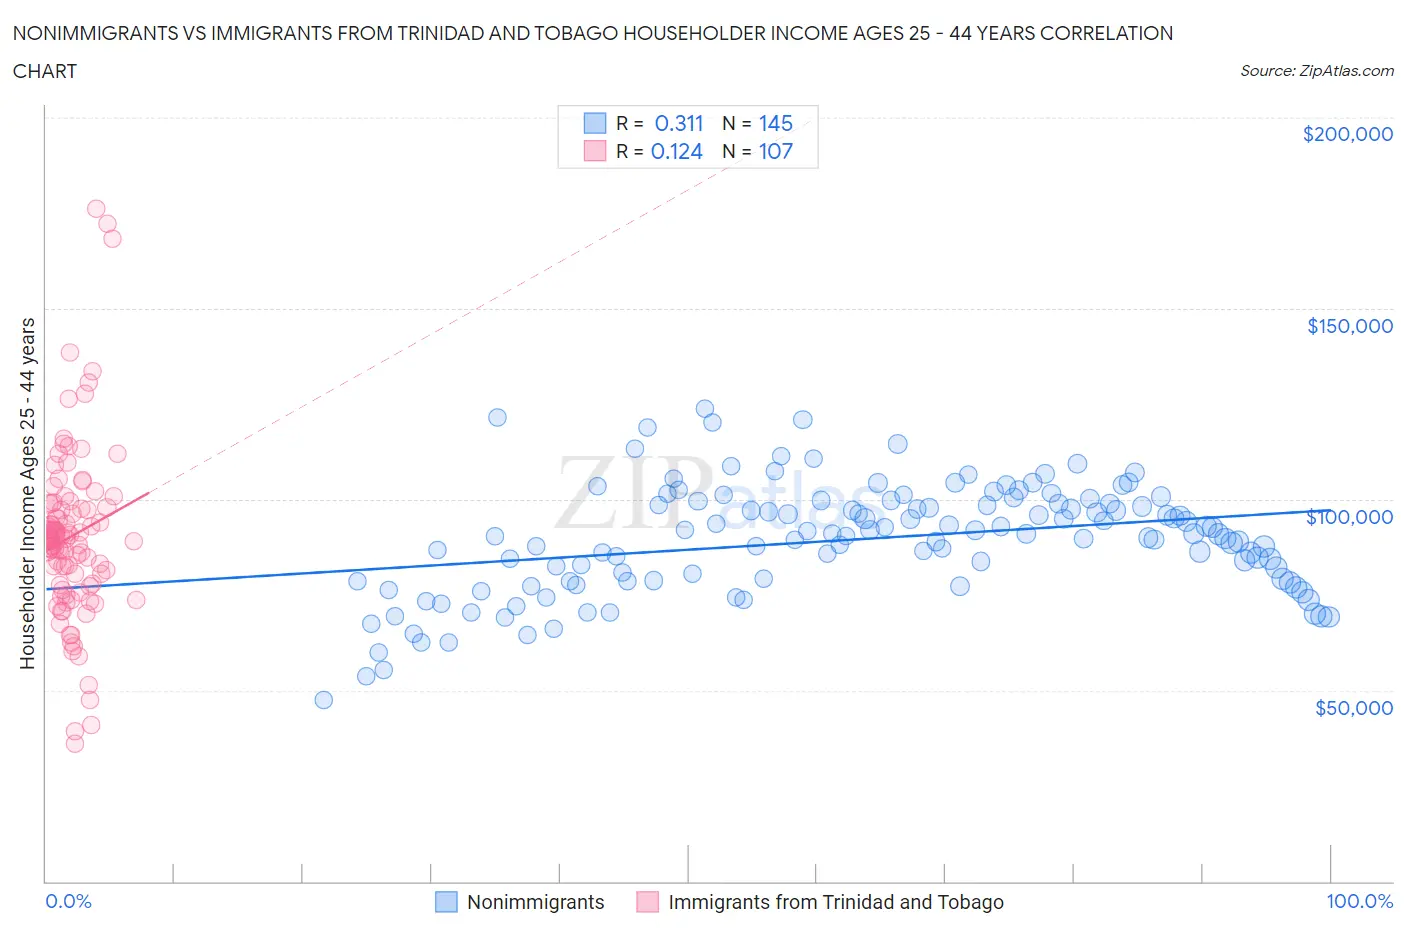 Nonimmigrants vs Immigrants from Trinidad and Tobago Householder Income Ages 25 - 44 years